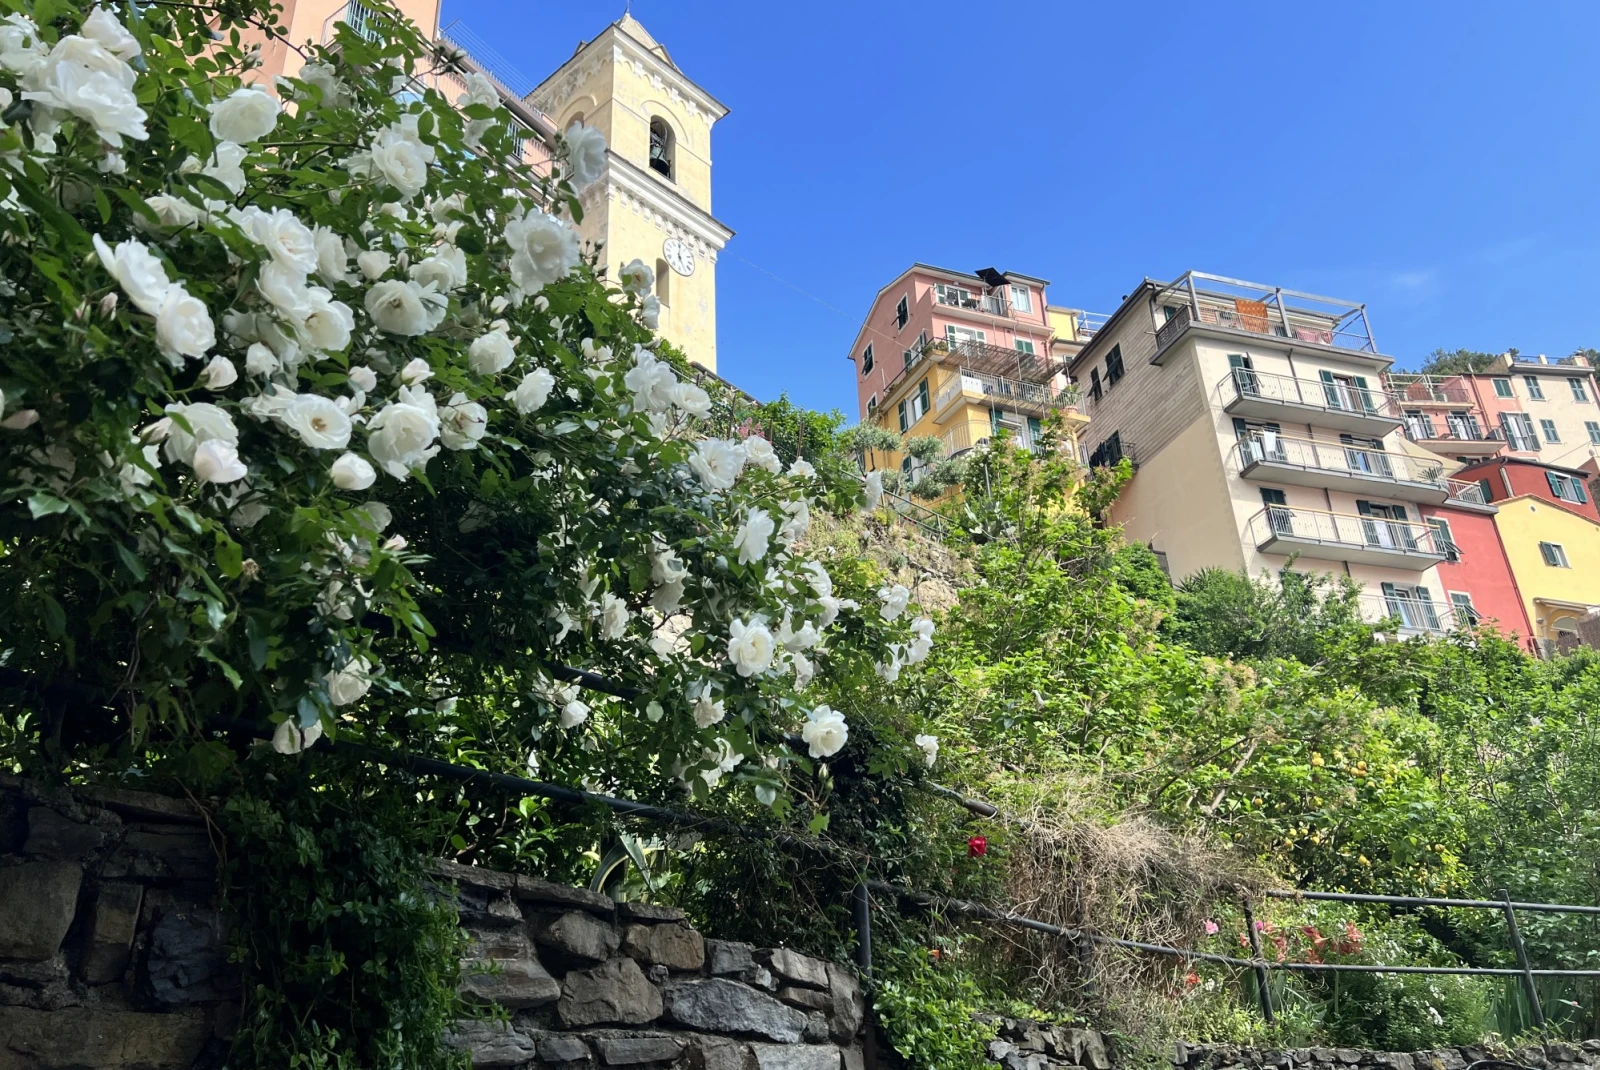 White flowers and buildings in town of Manarola